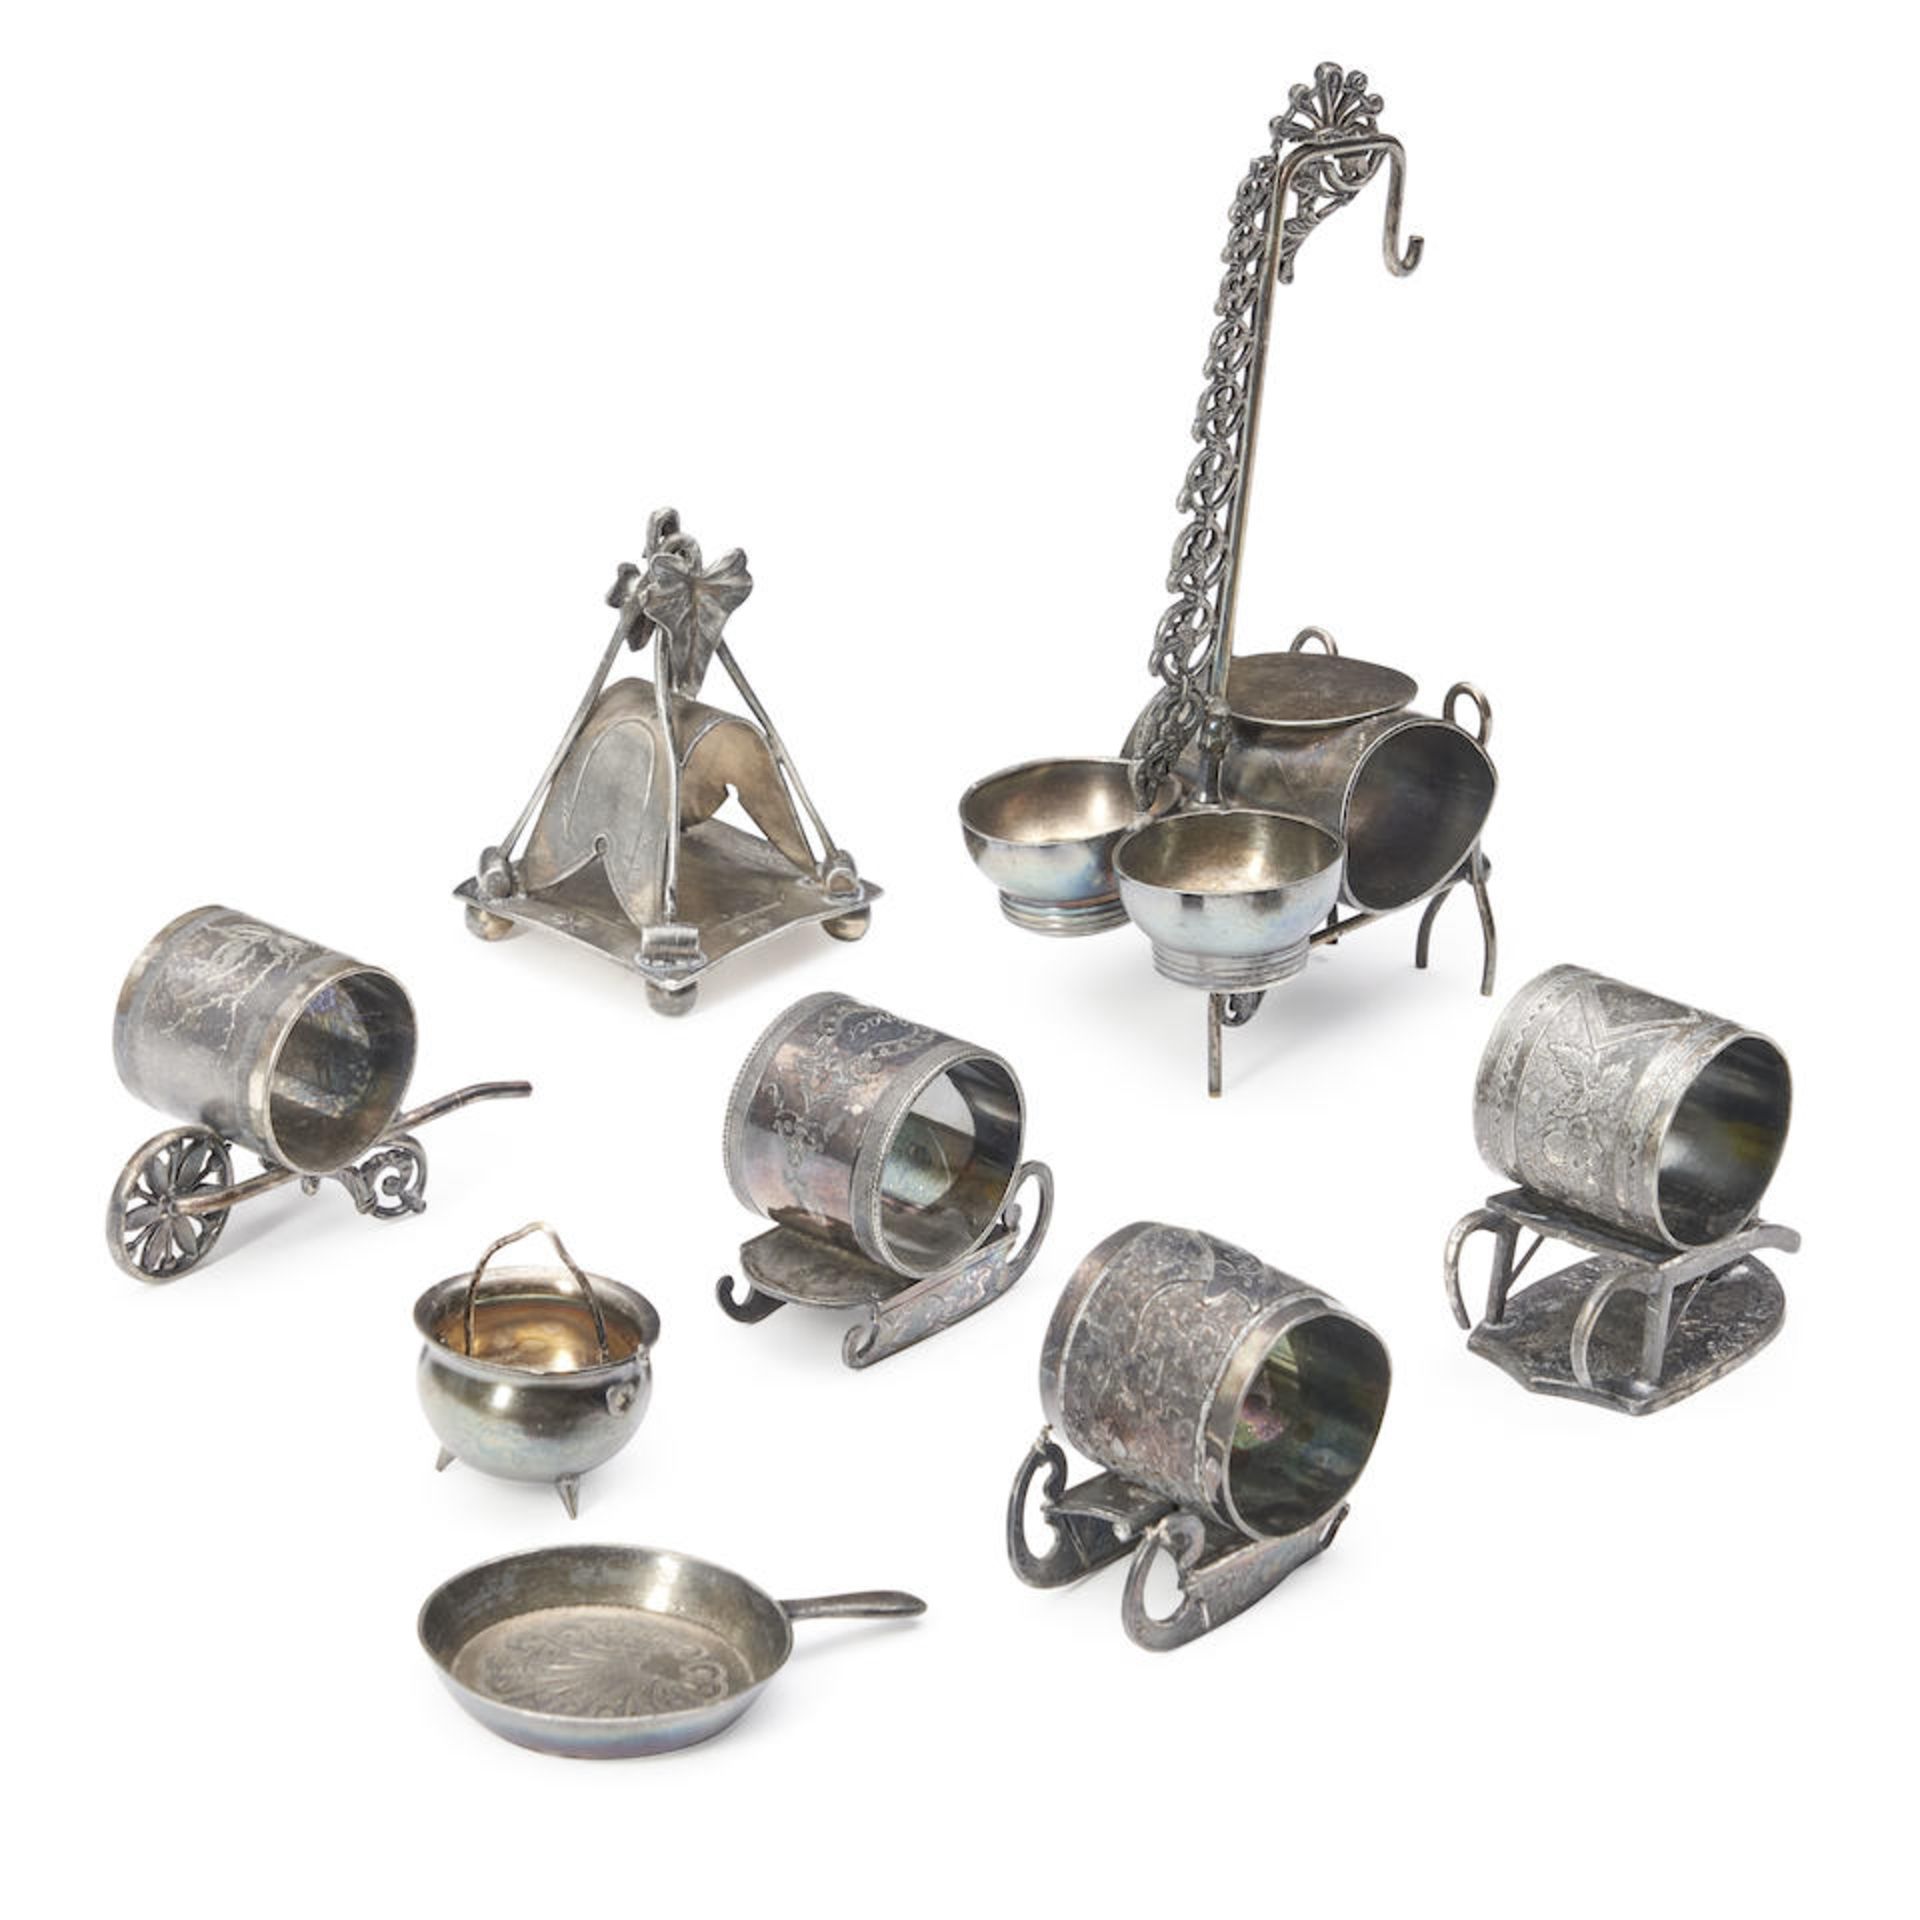 SIX SILVER-PLATED NAPKIN RINGS ON STANDS